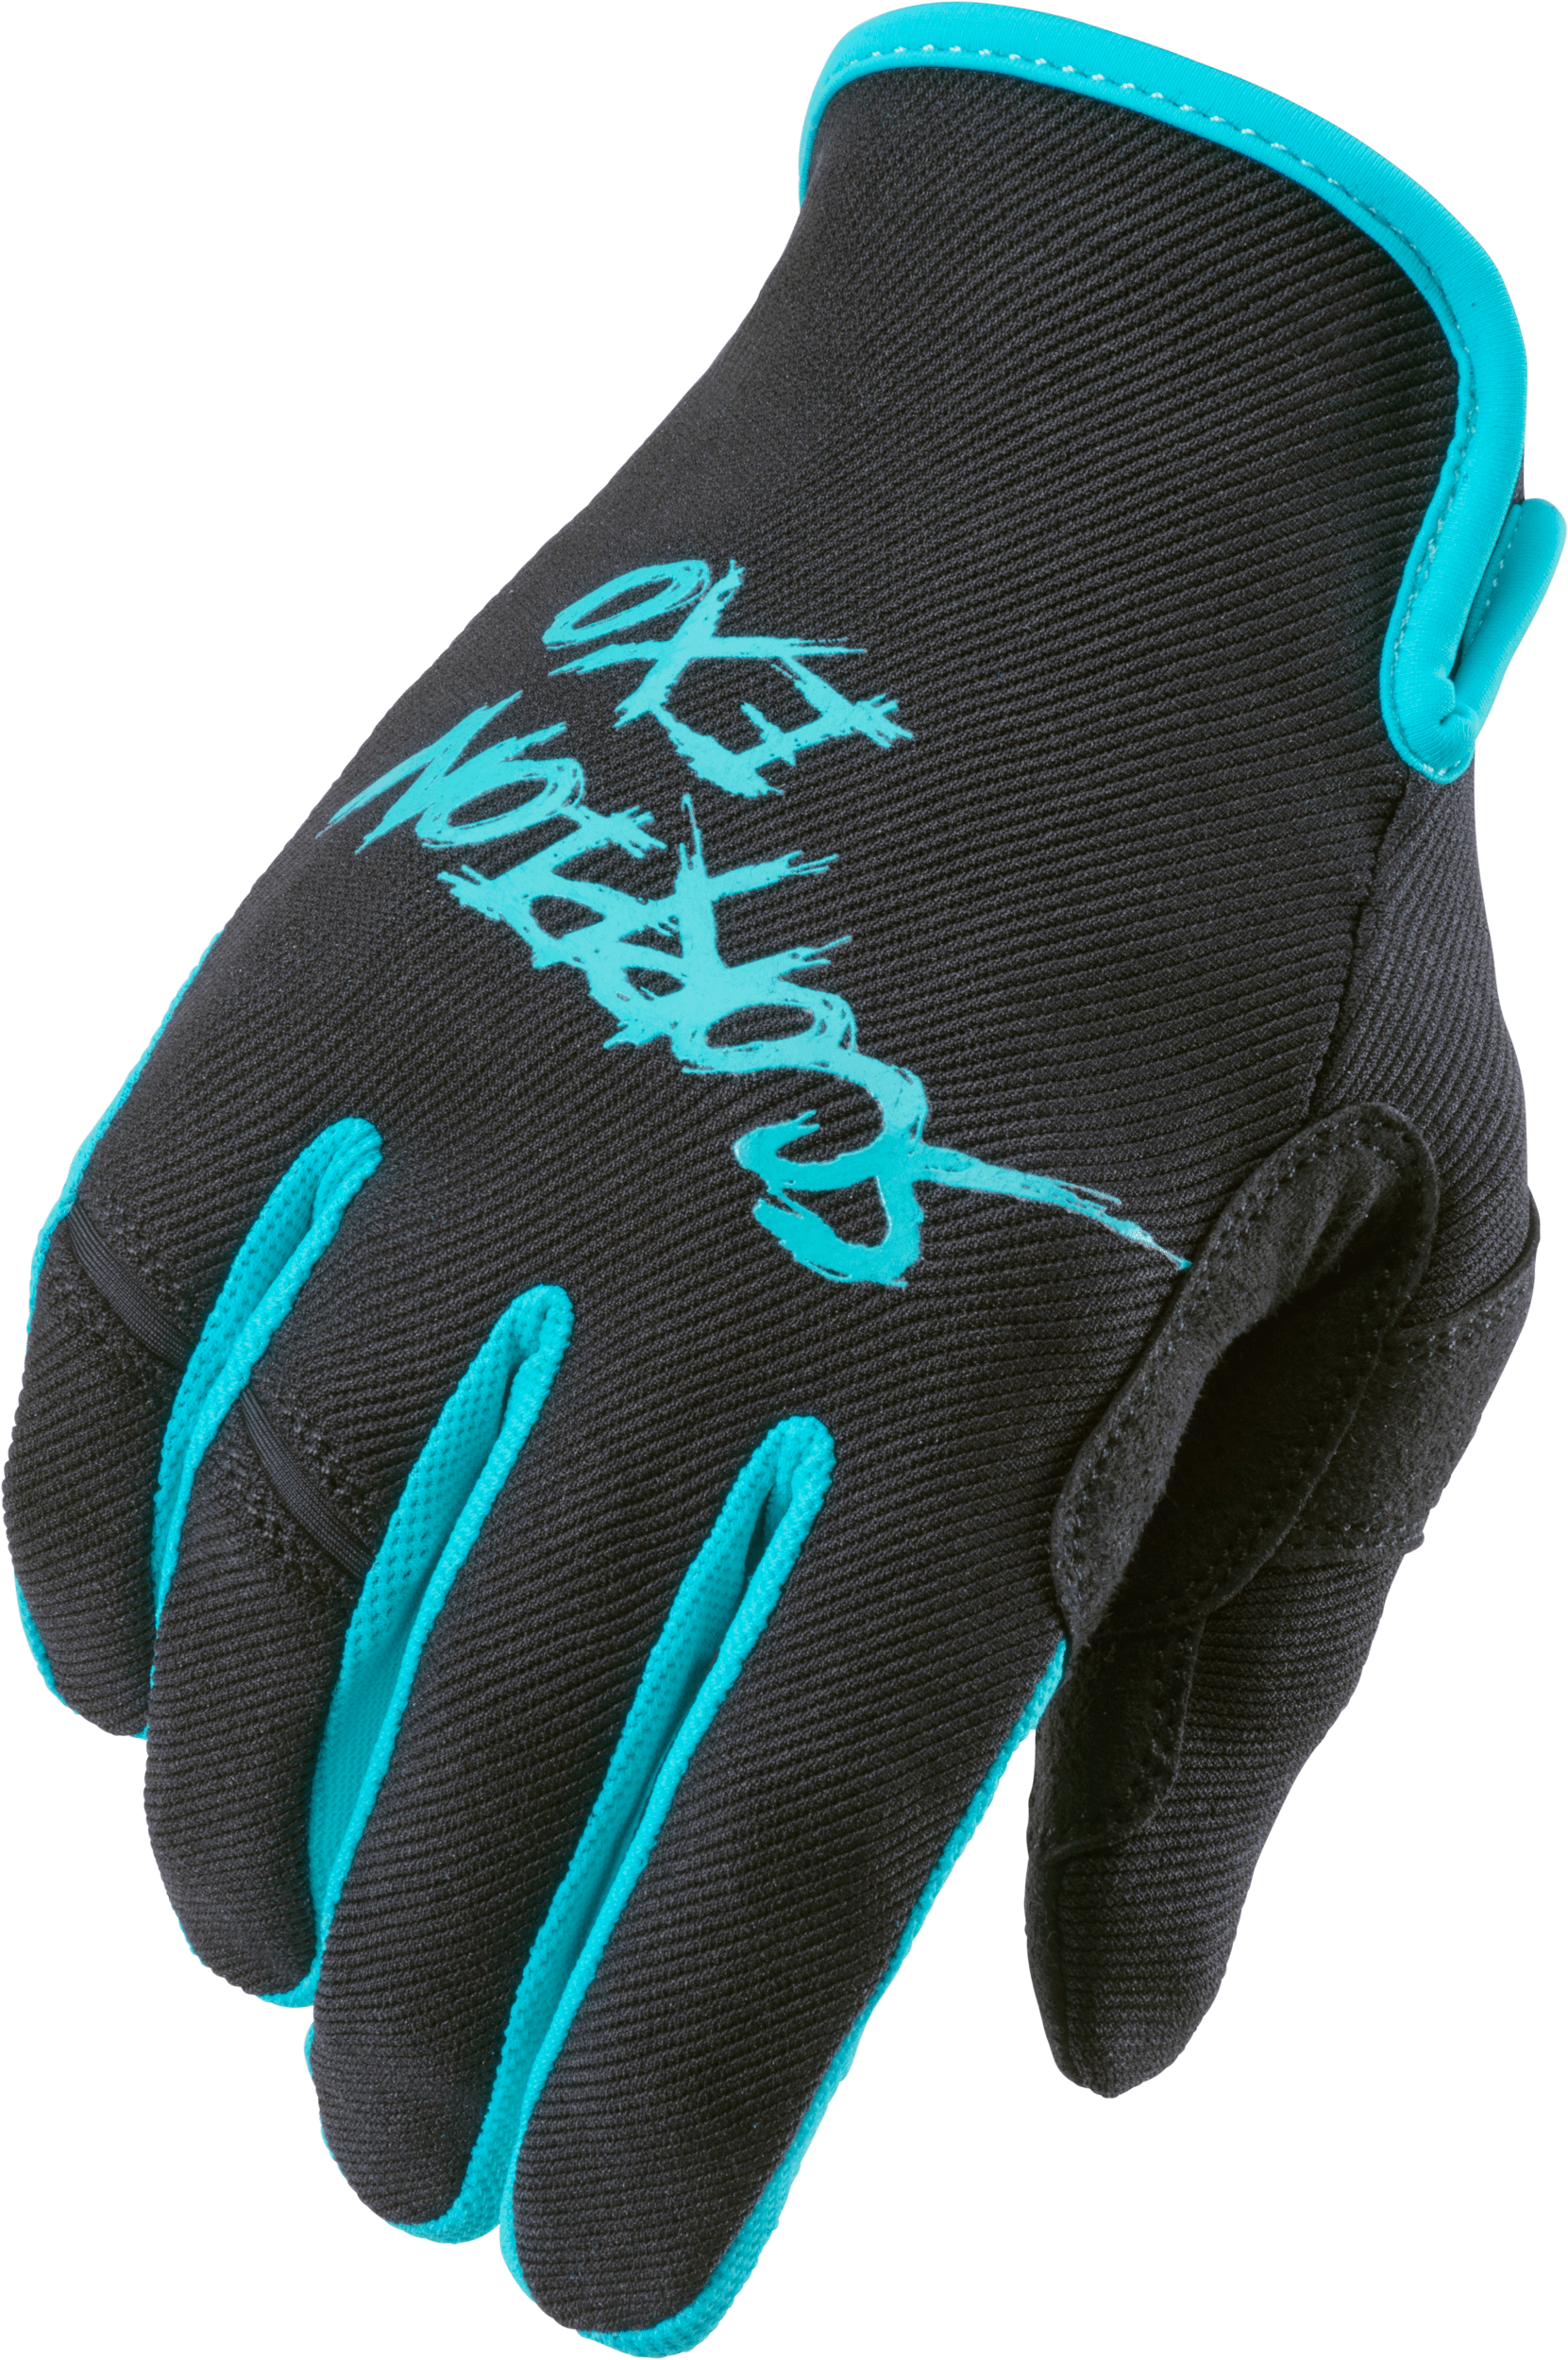 Western Powersports Gloves Black/Teal / 2X-Large Air-Stretch Grind Gloves by Scorpion Exo G46-067